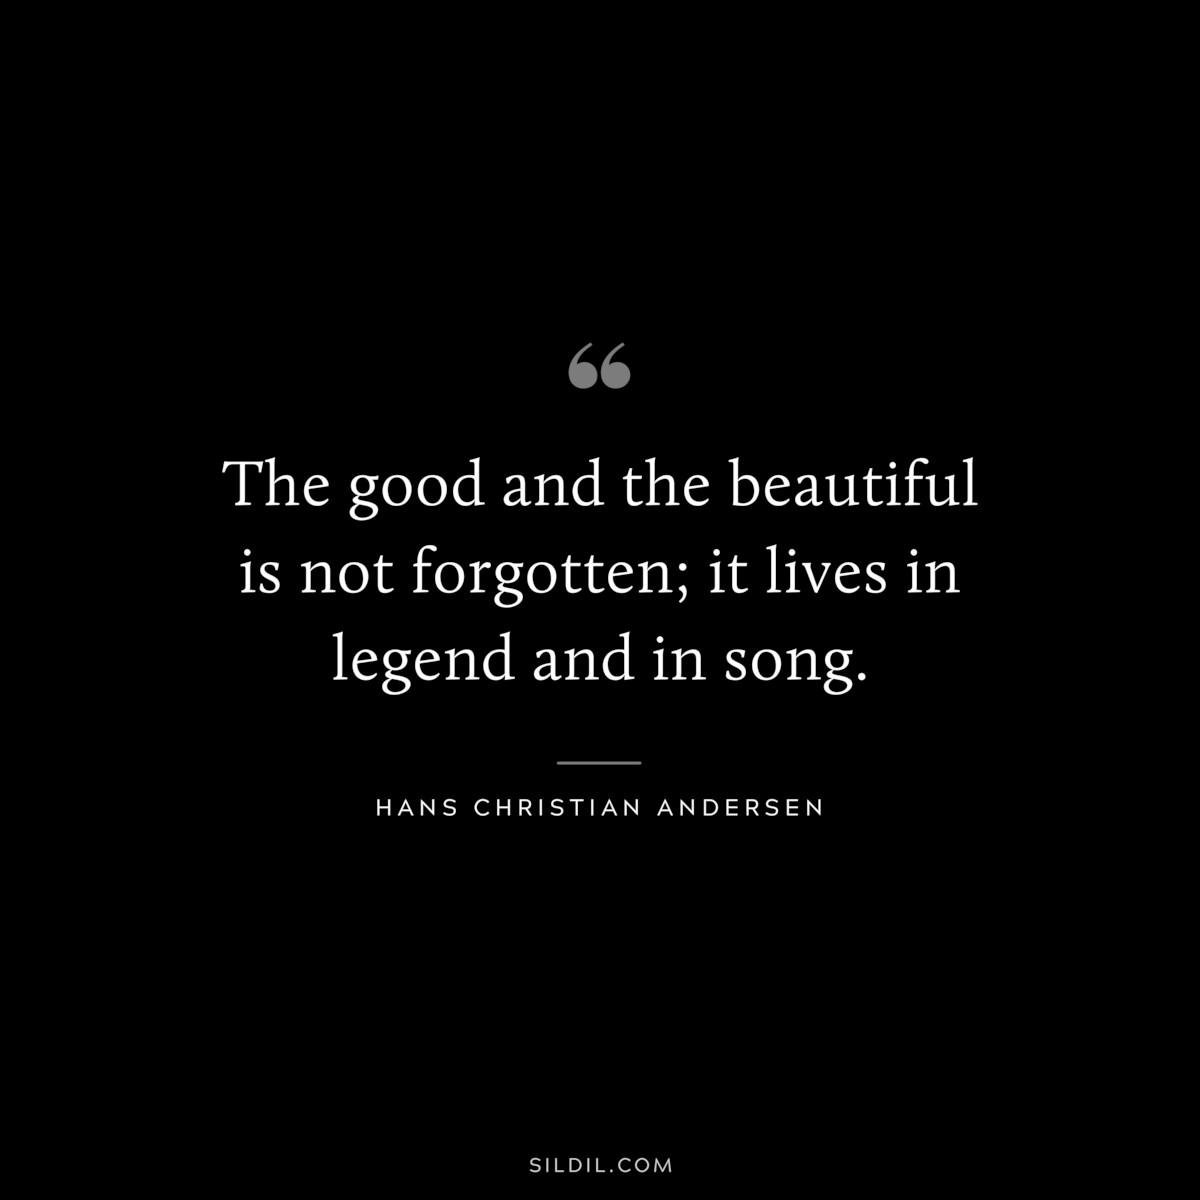 The good and the beautiful is not forgotten; it lives in legend and in song. ― Hans Christian Andersen